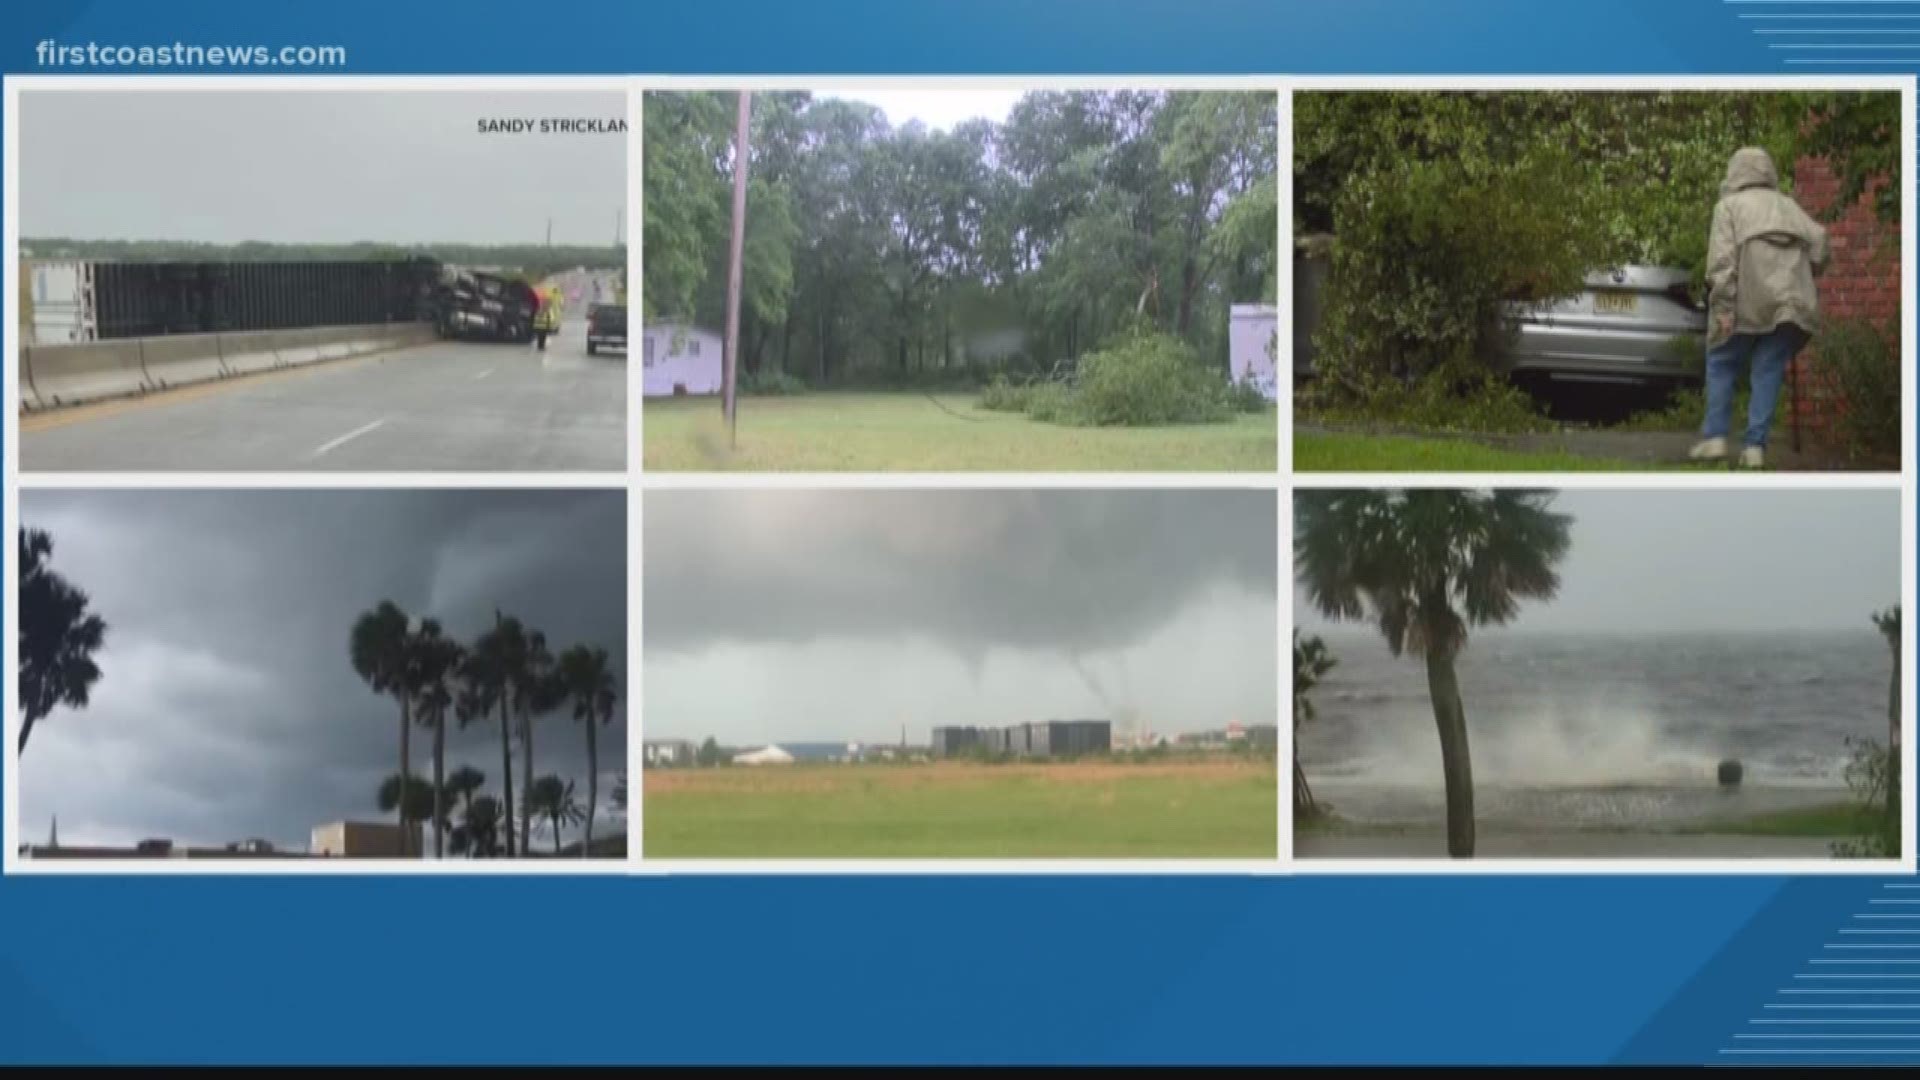 Severe weather swept across the First Coast Friday, leaving behind trails of damage.